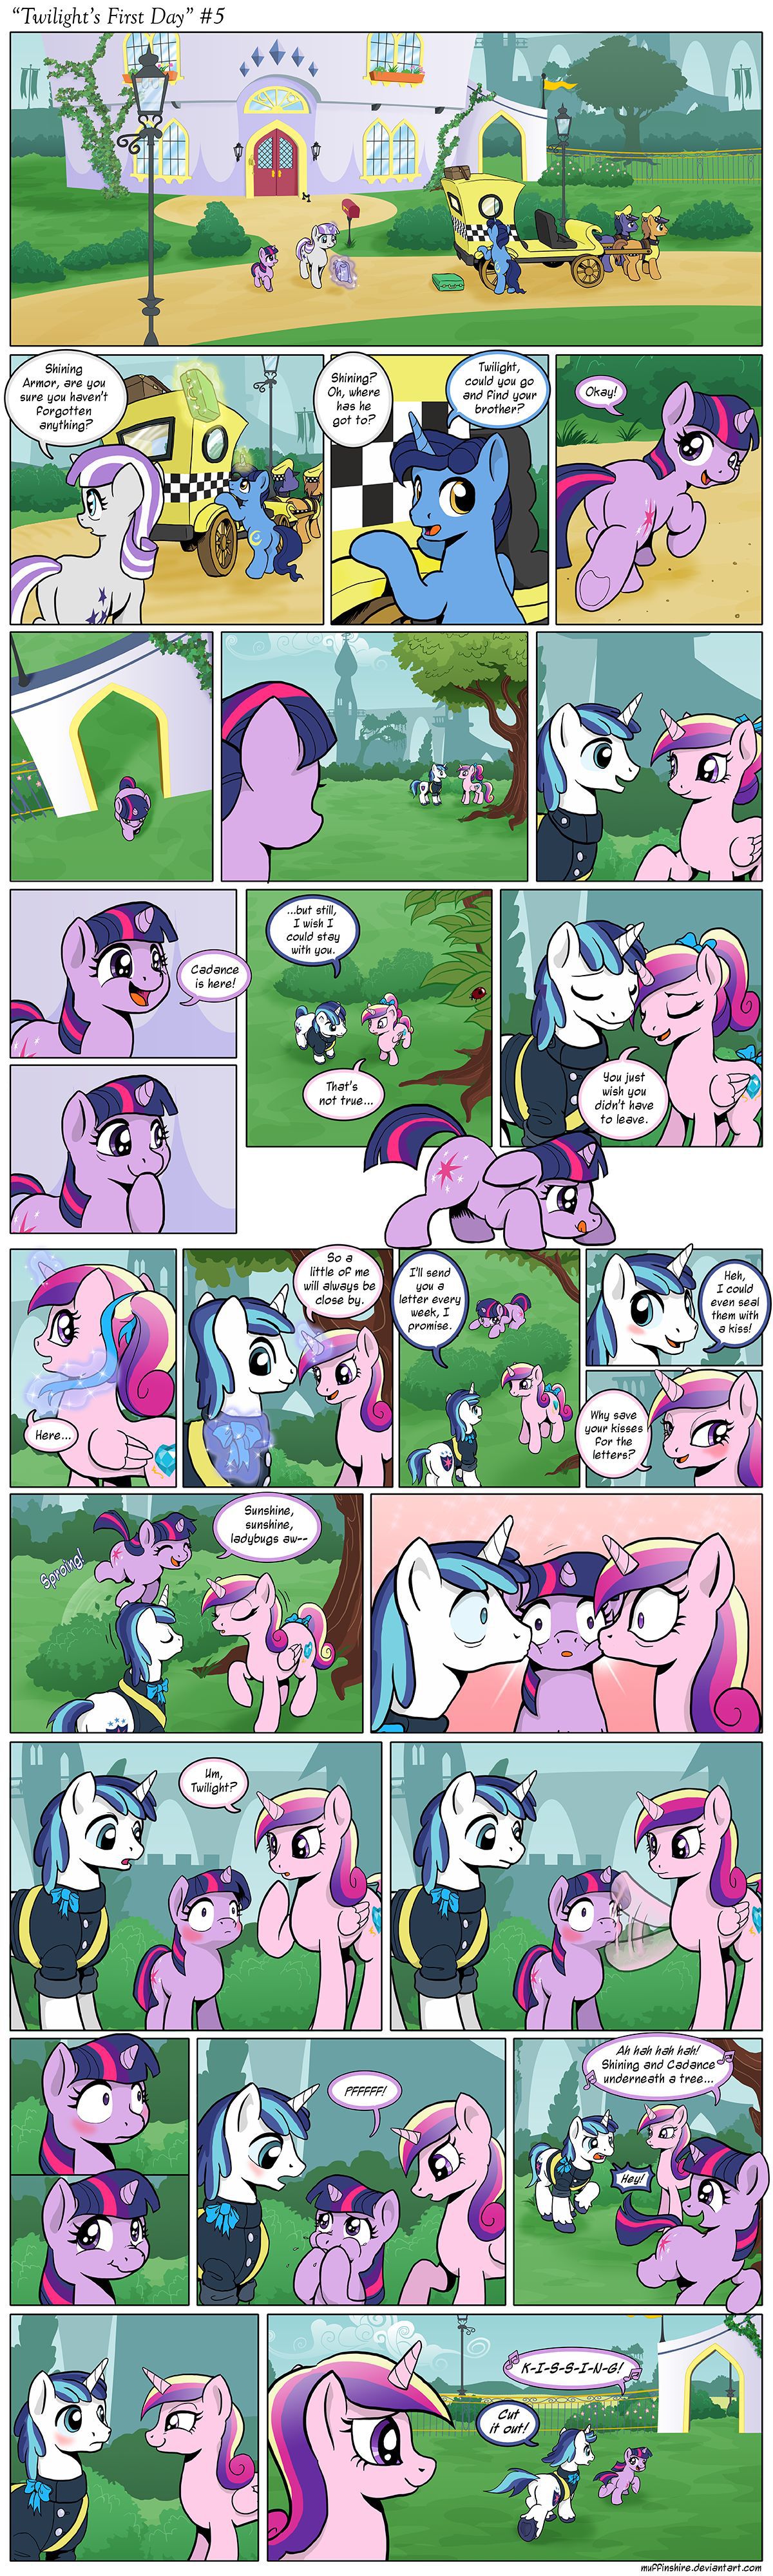 [Muffinshire] Twilight's First Day (My Little Pony: Friendship is Magic) [English] 5